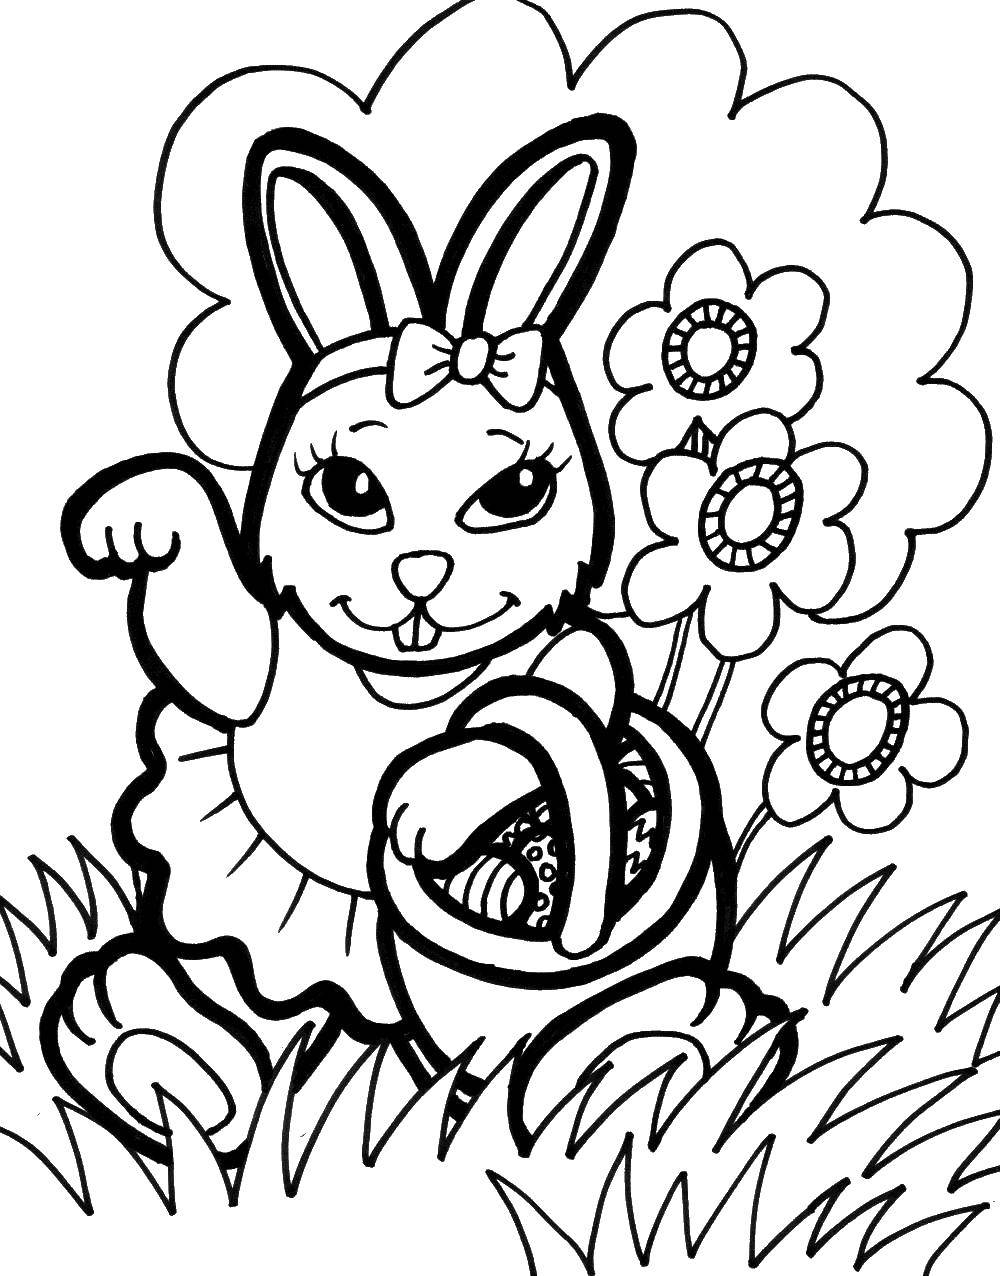 Coloring Rabbit with basket of eggs. Category the rabbit. Tags:  rabbits, eggs, Easter.